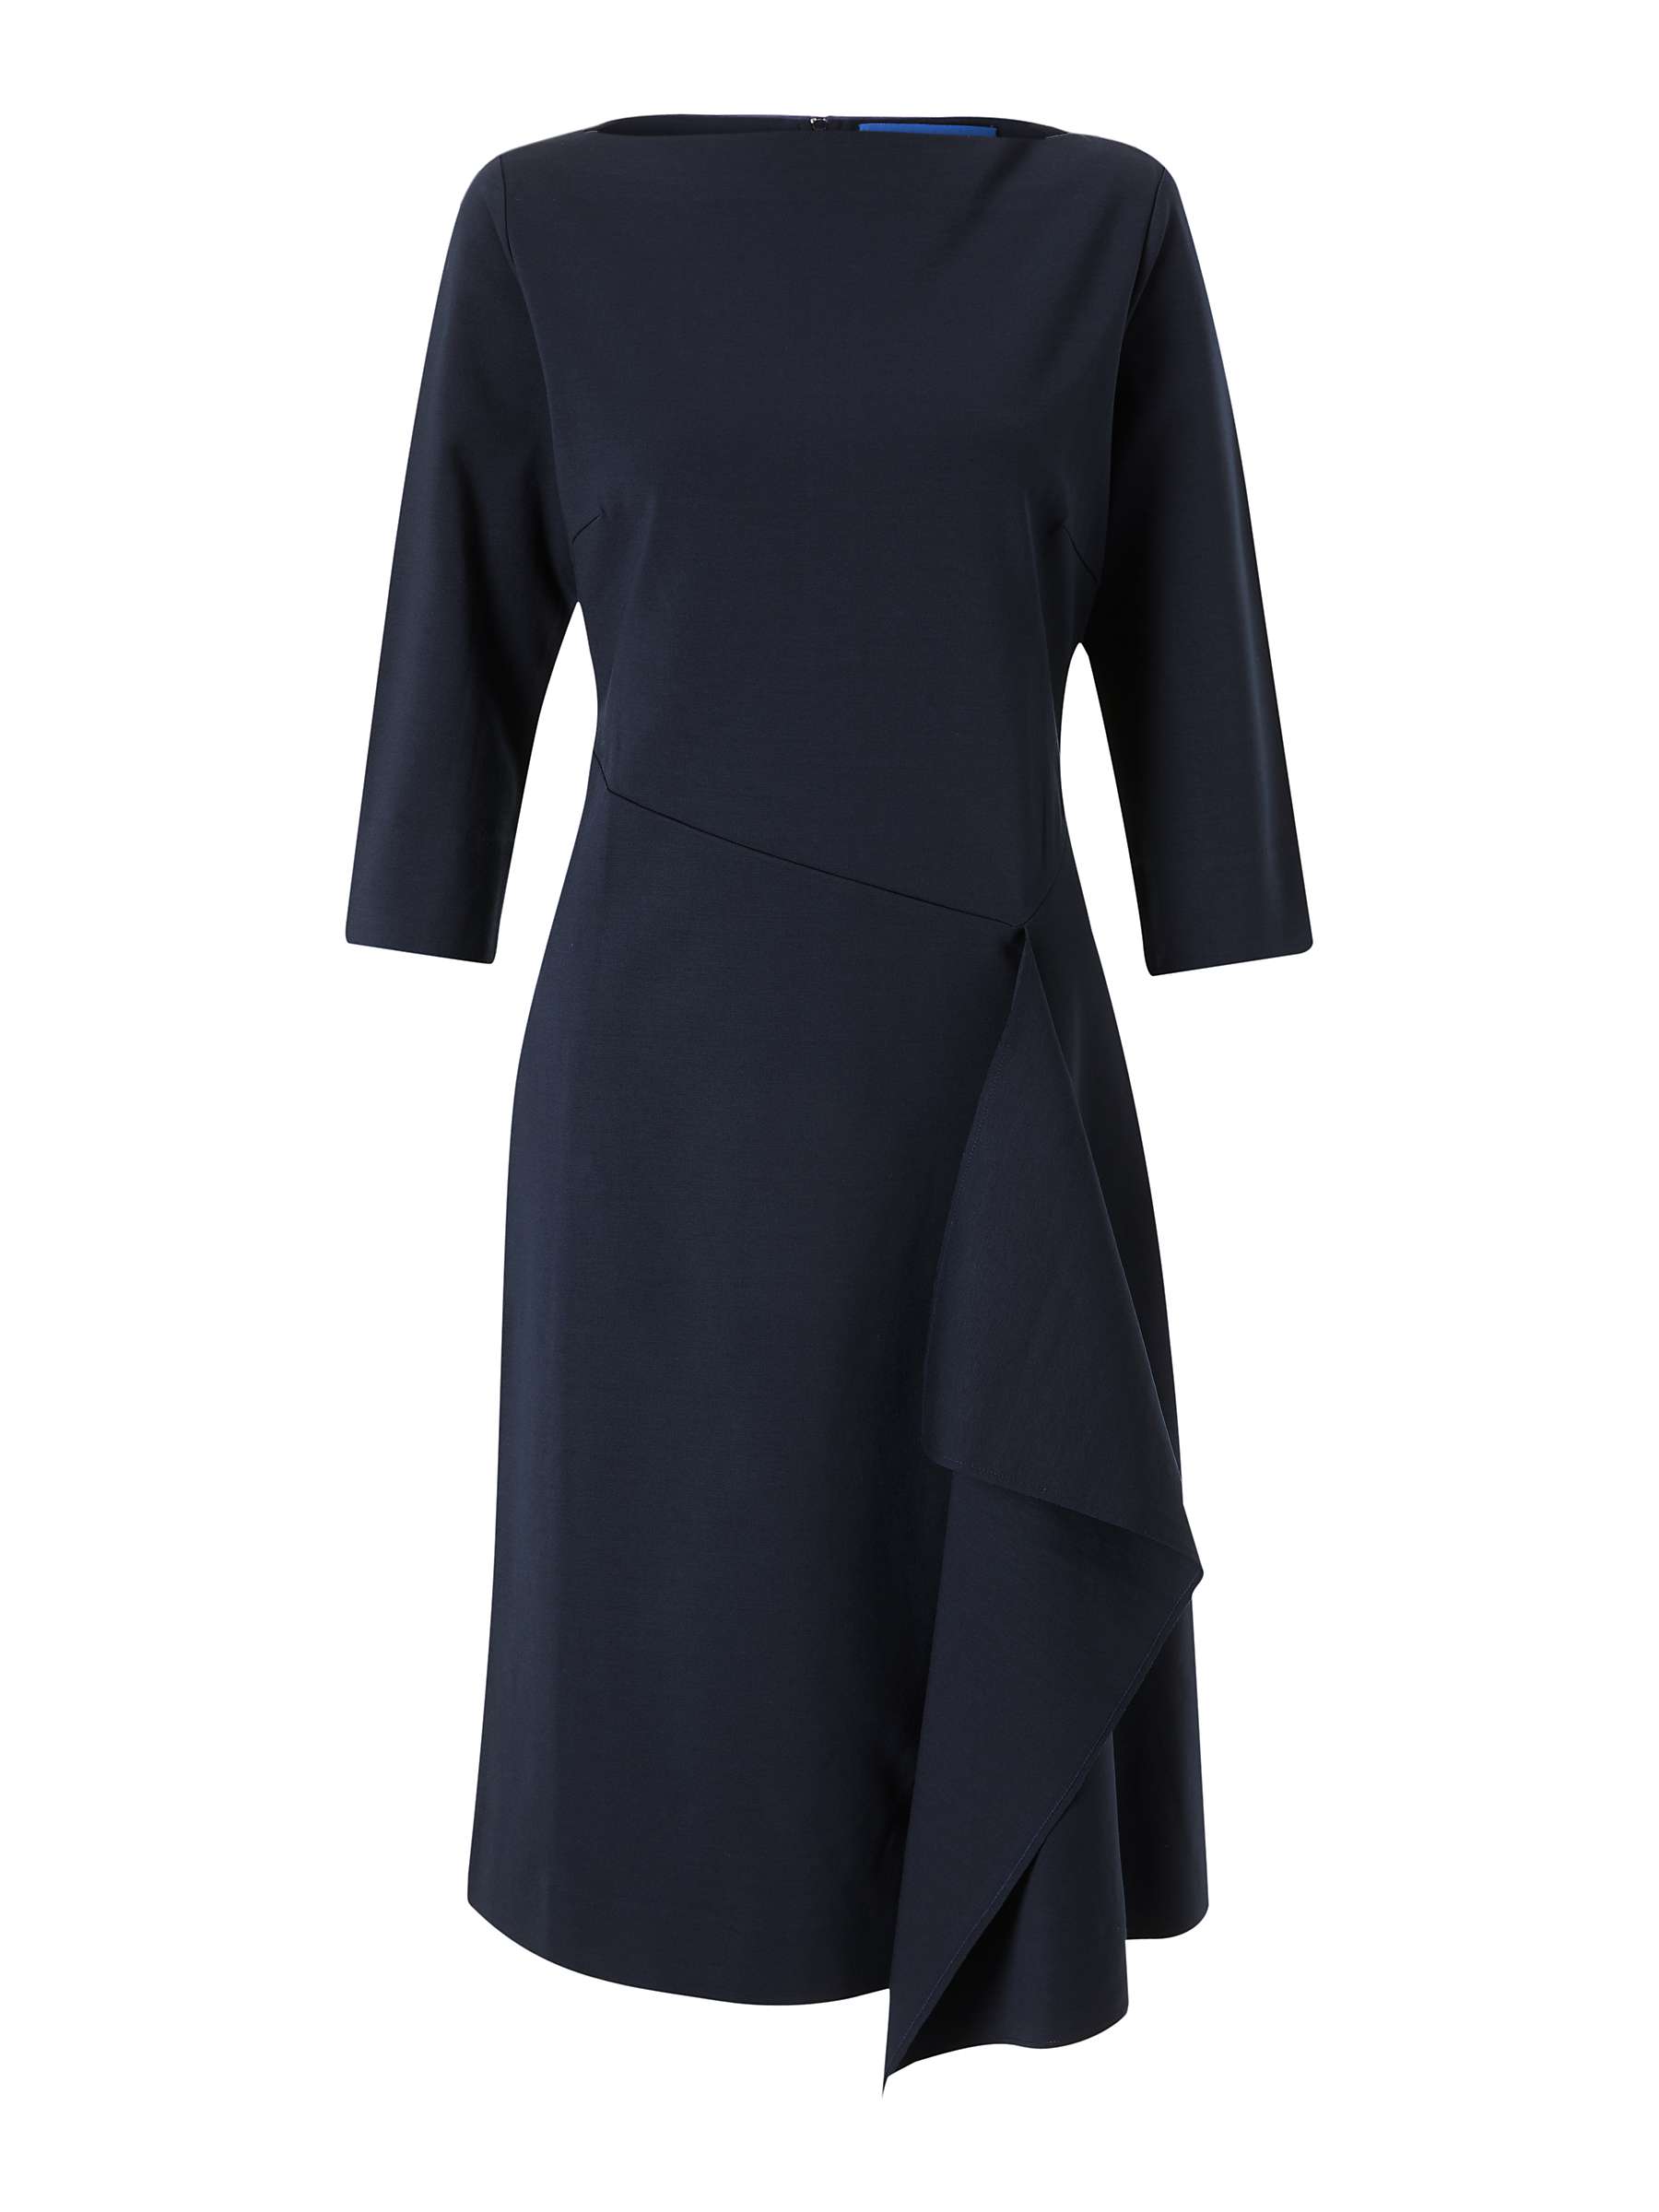 Buy Winser London Emily Miracle Dress Online at johnlewis.com